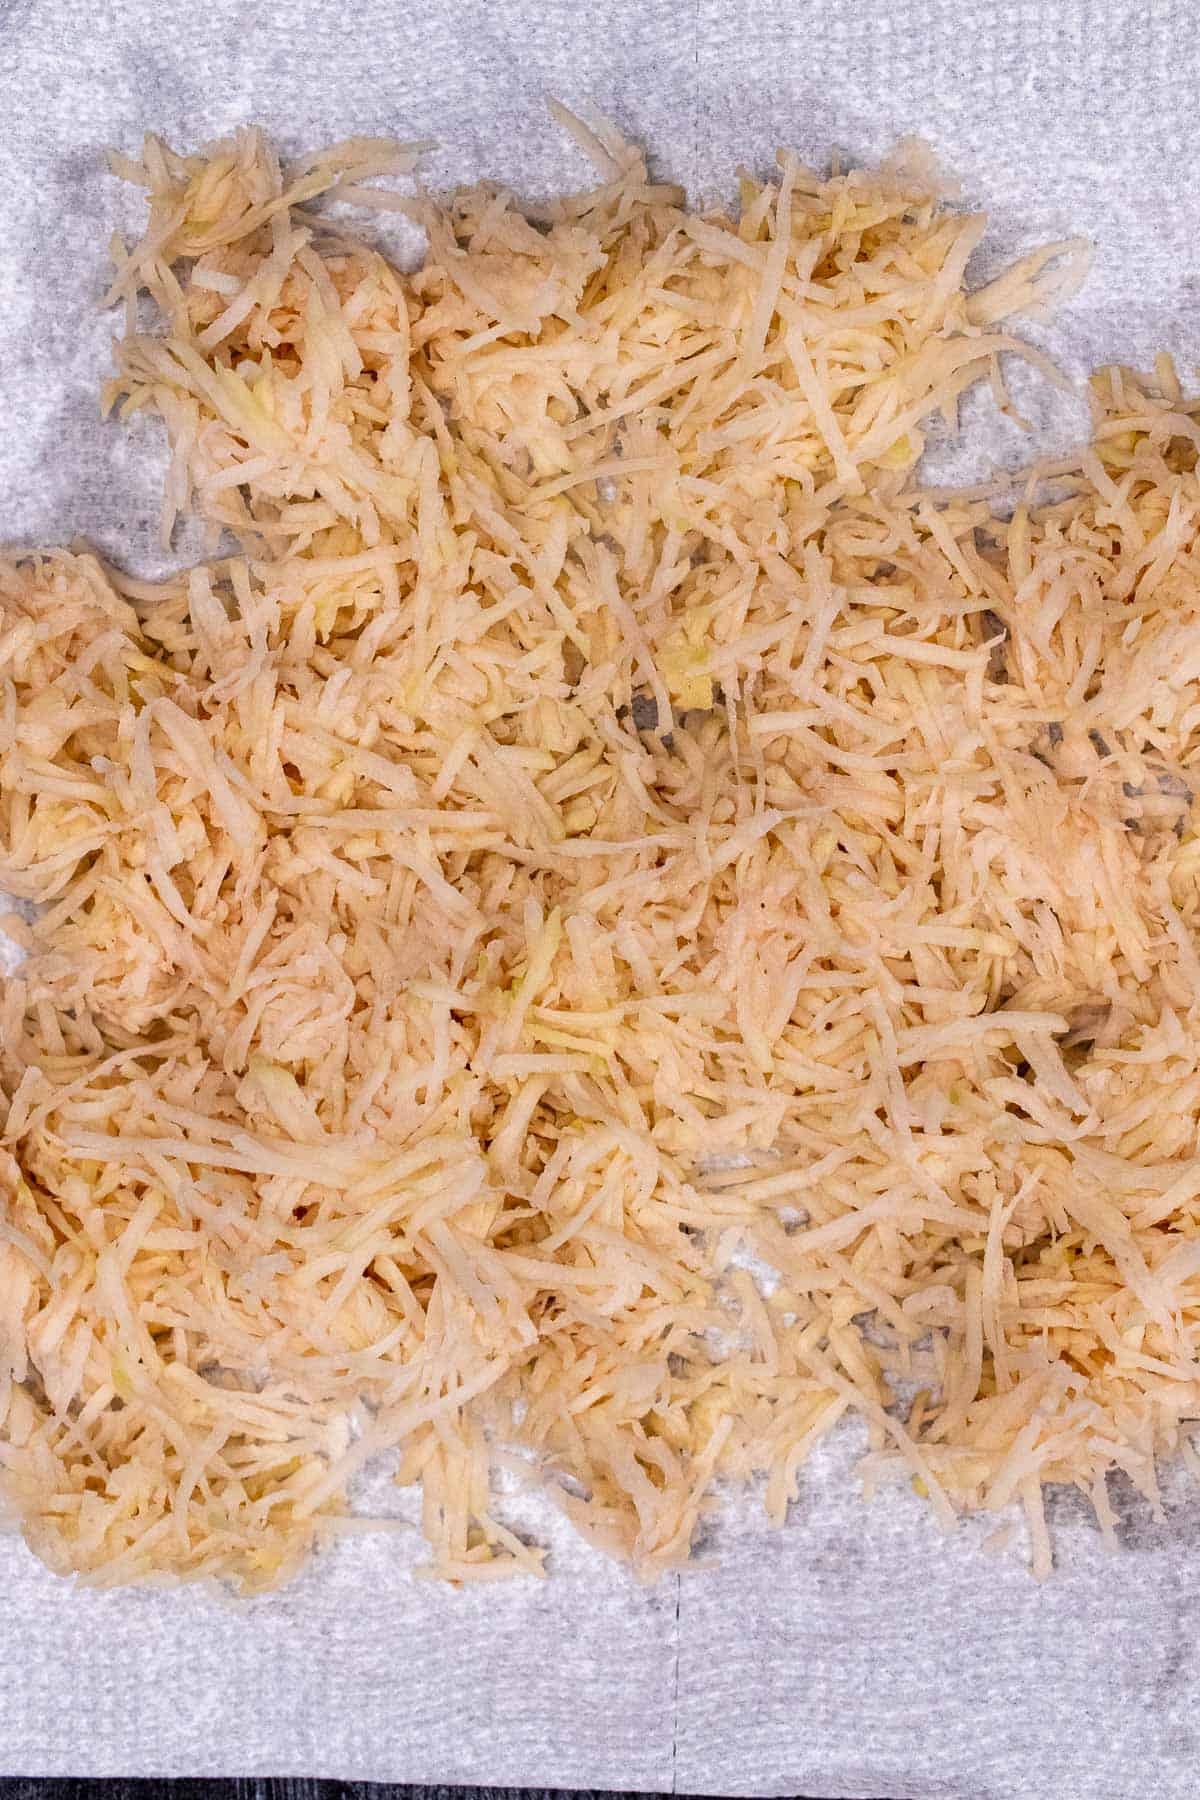 Peeled and shredded potatoes drained of excess moisture on a paper towel.